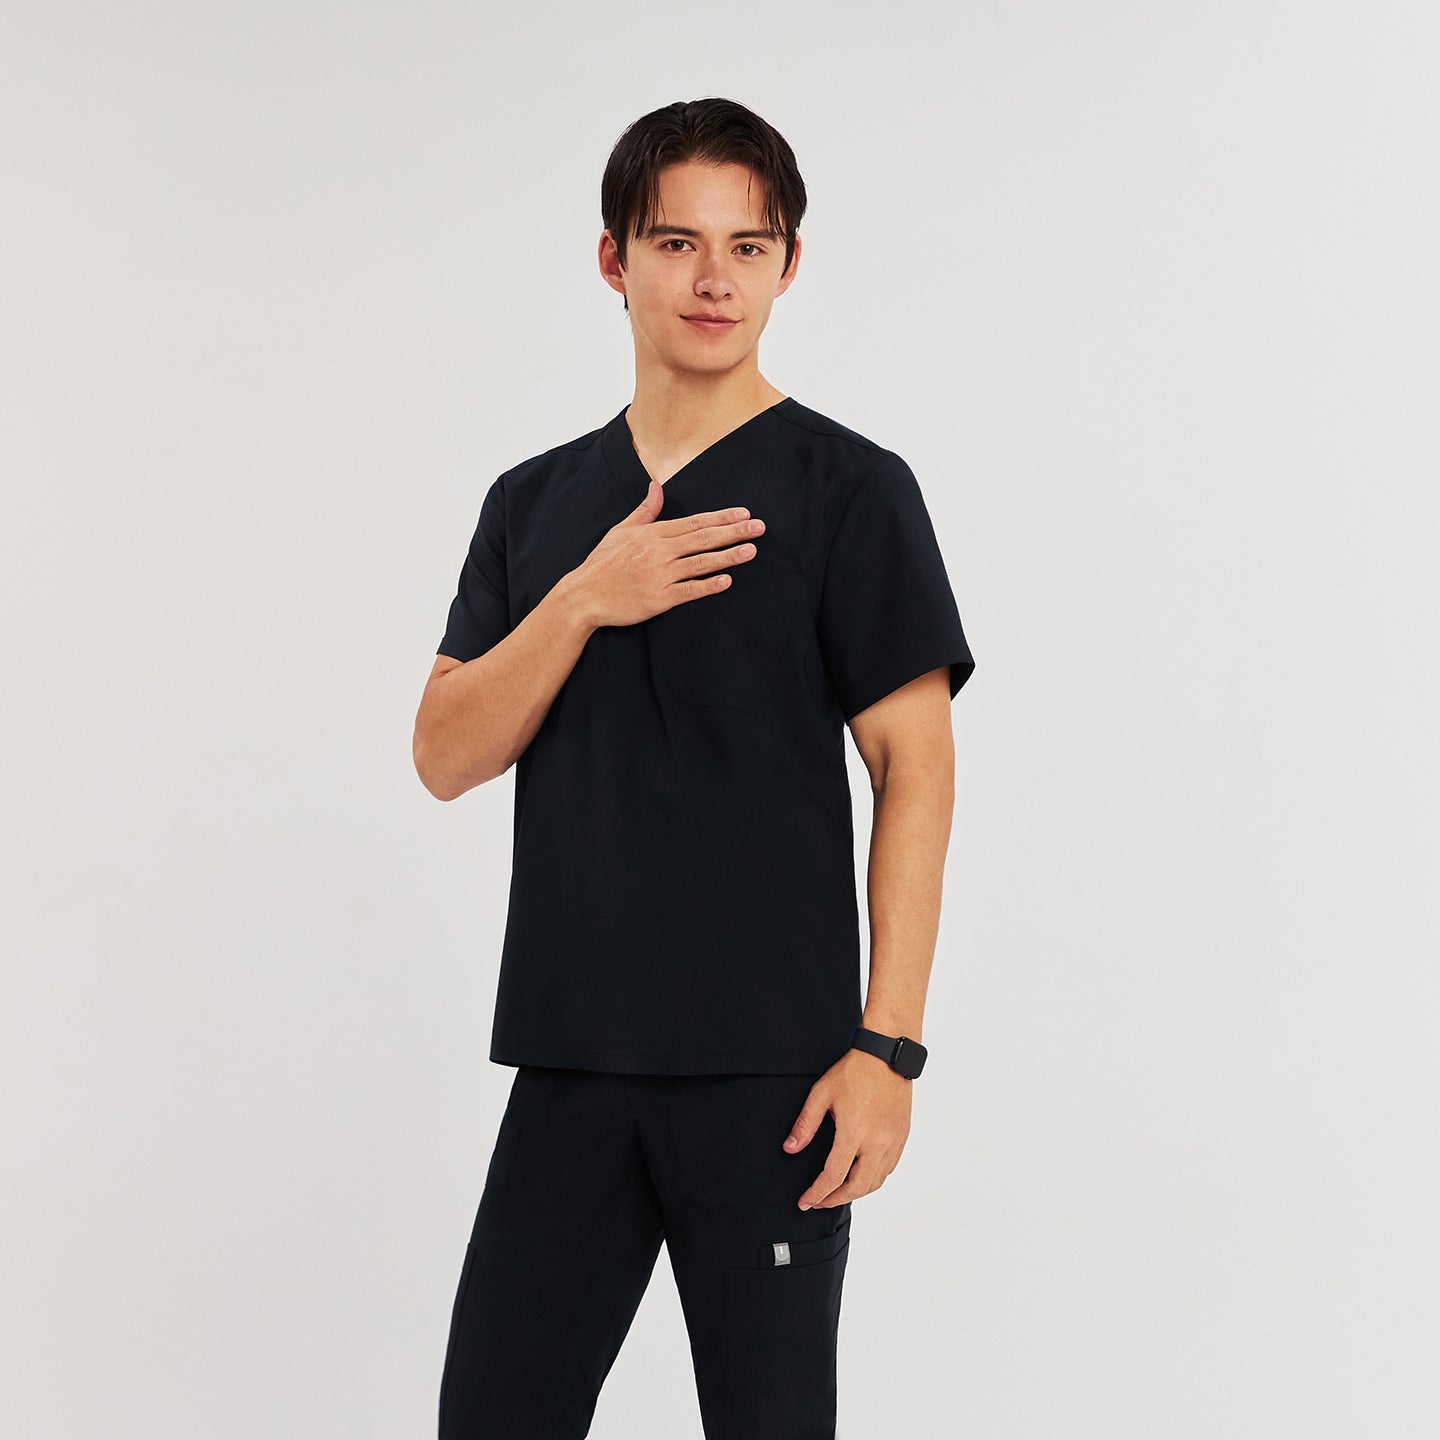 Man in black Zenir scrub top with chest pocket, standing with hand on chest, looking at the camera,Black